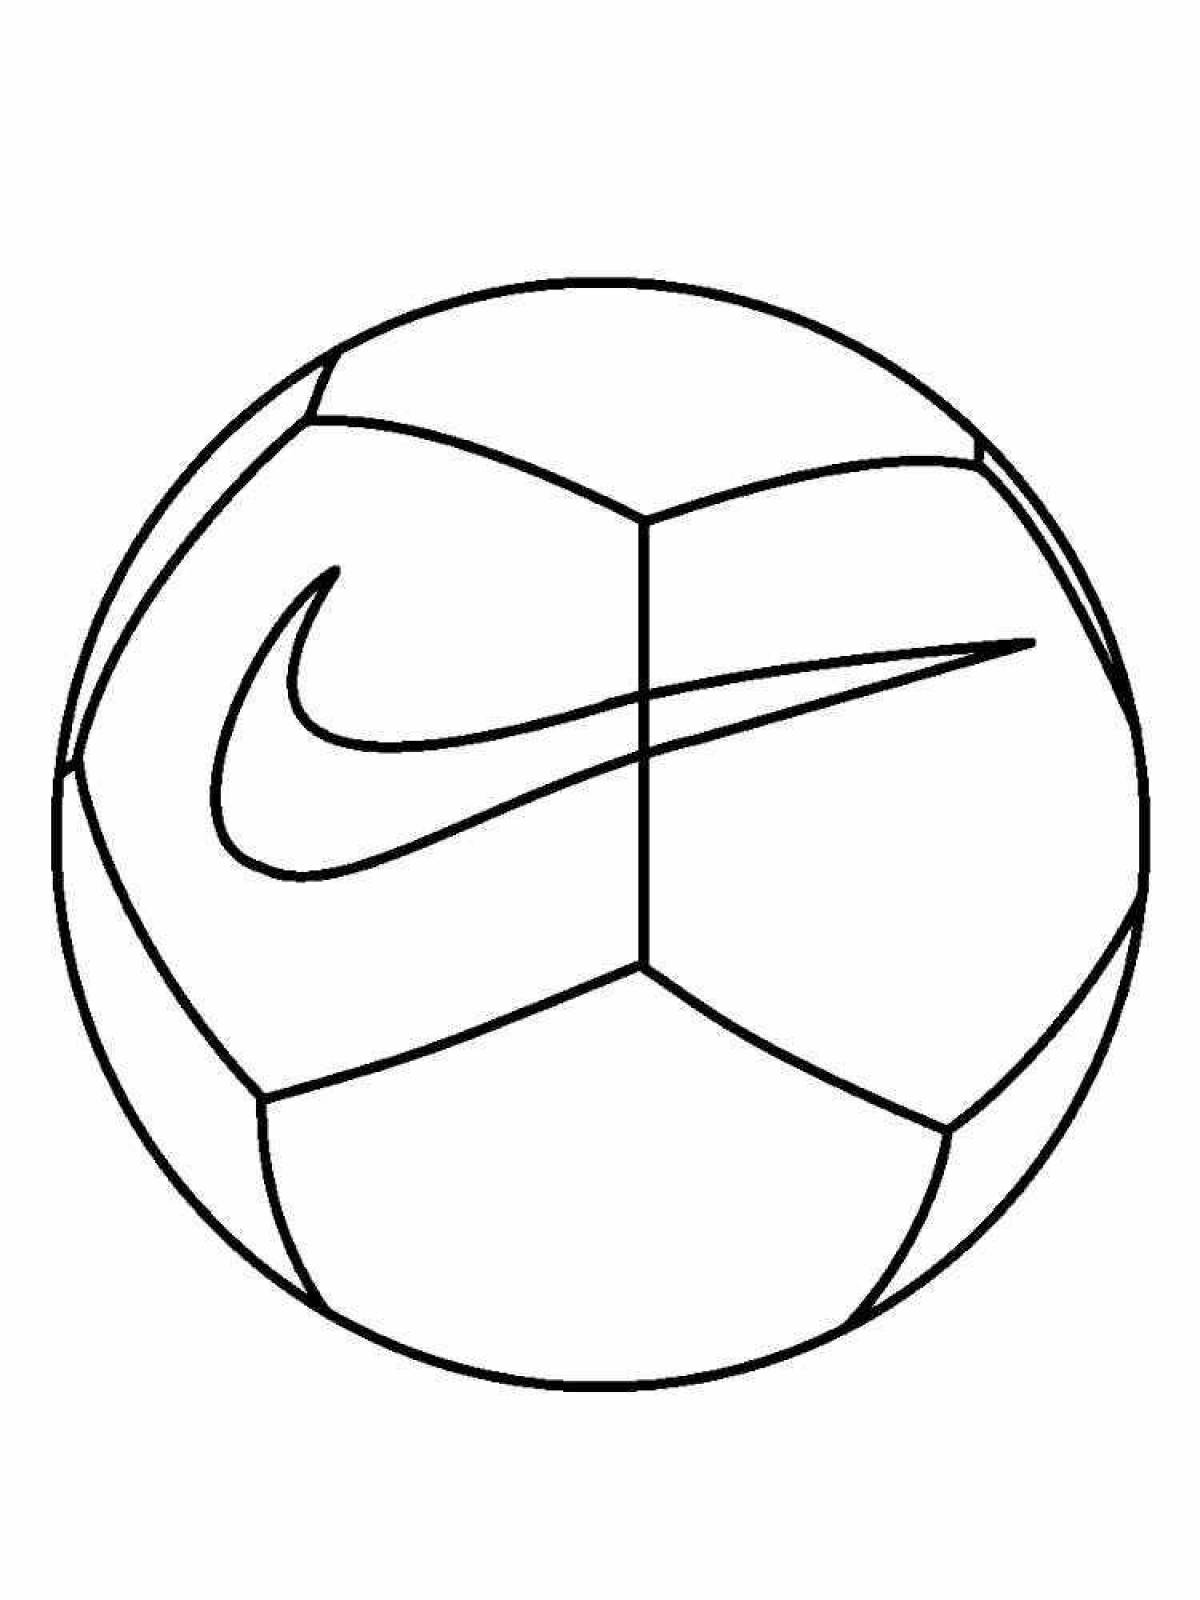 Coloring book amazing football